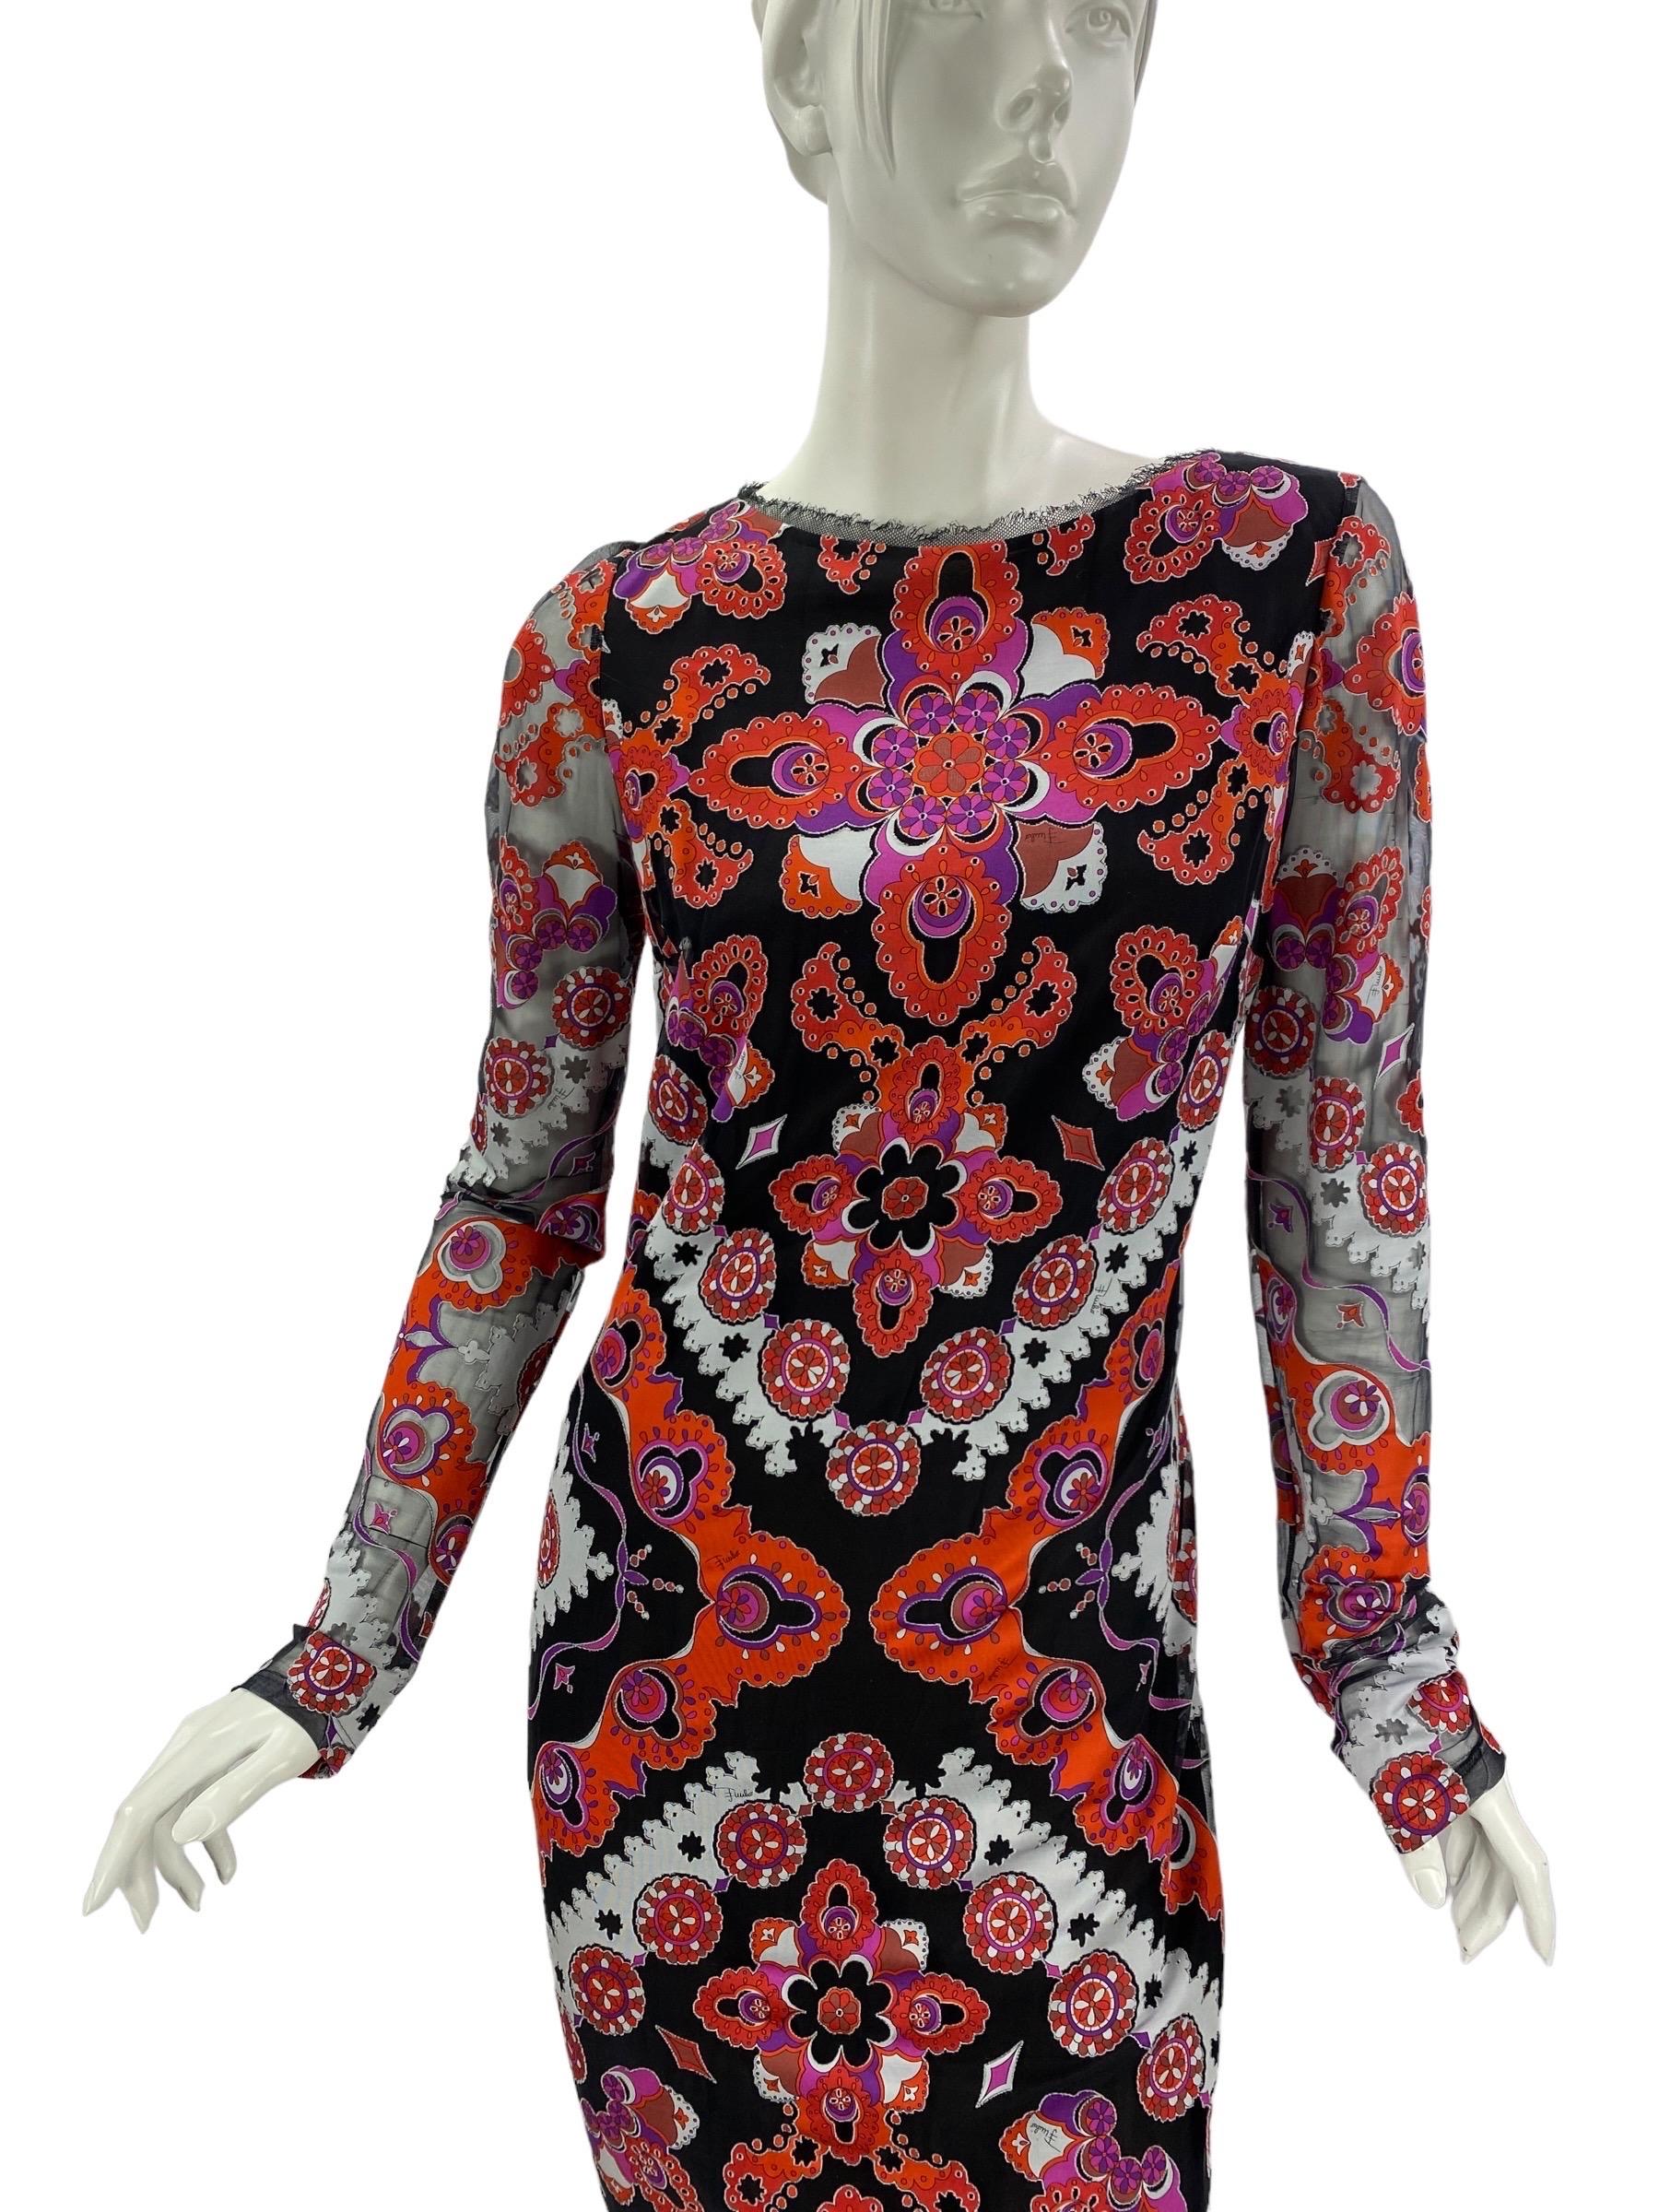 Iconic Emilio Pucci Multicolor Printed Devore Long Dress Gown Italian 42 - US 6 In Excellent Condition For Sale In Montgomery, TX